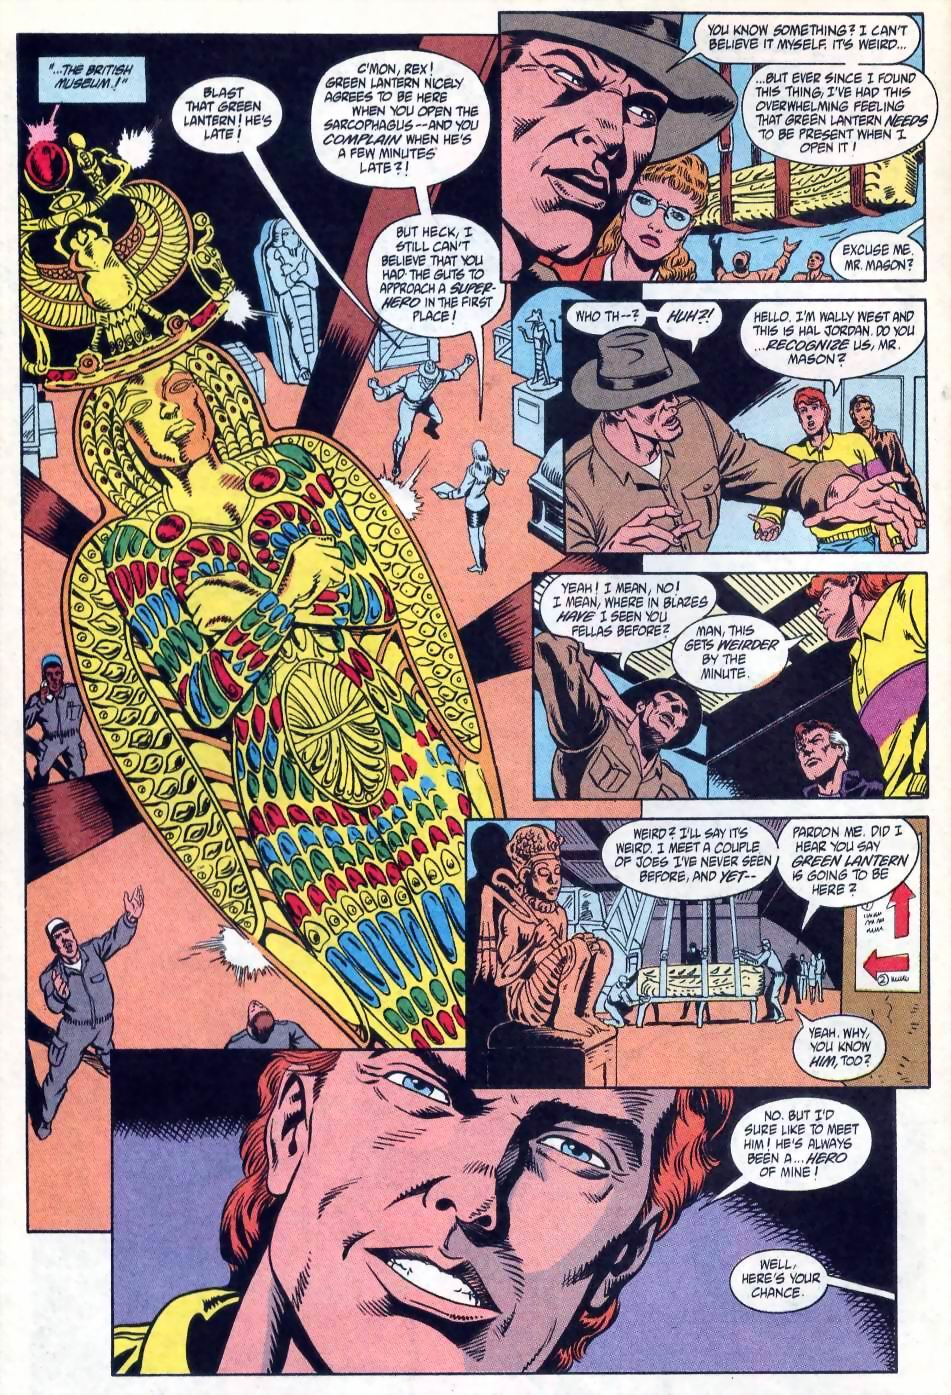 Justice League International (1993) 59 Page 7